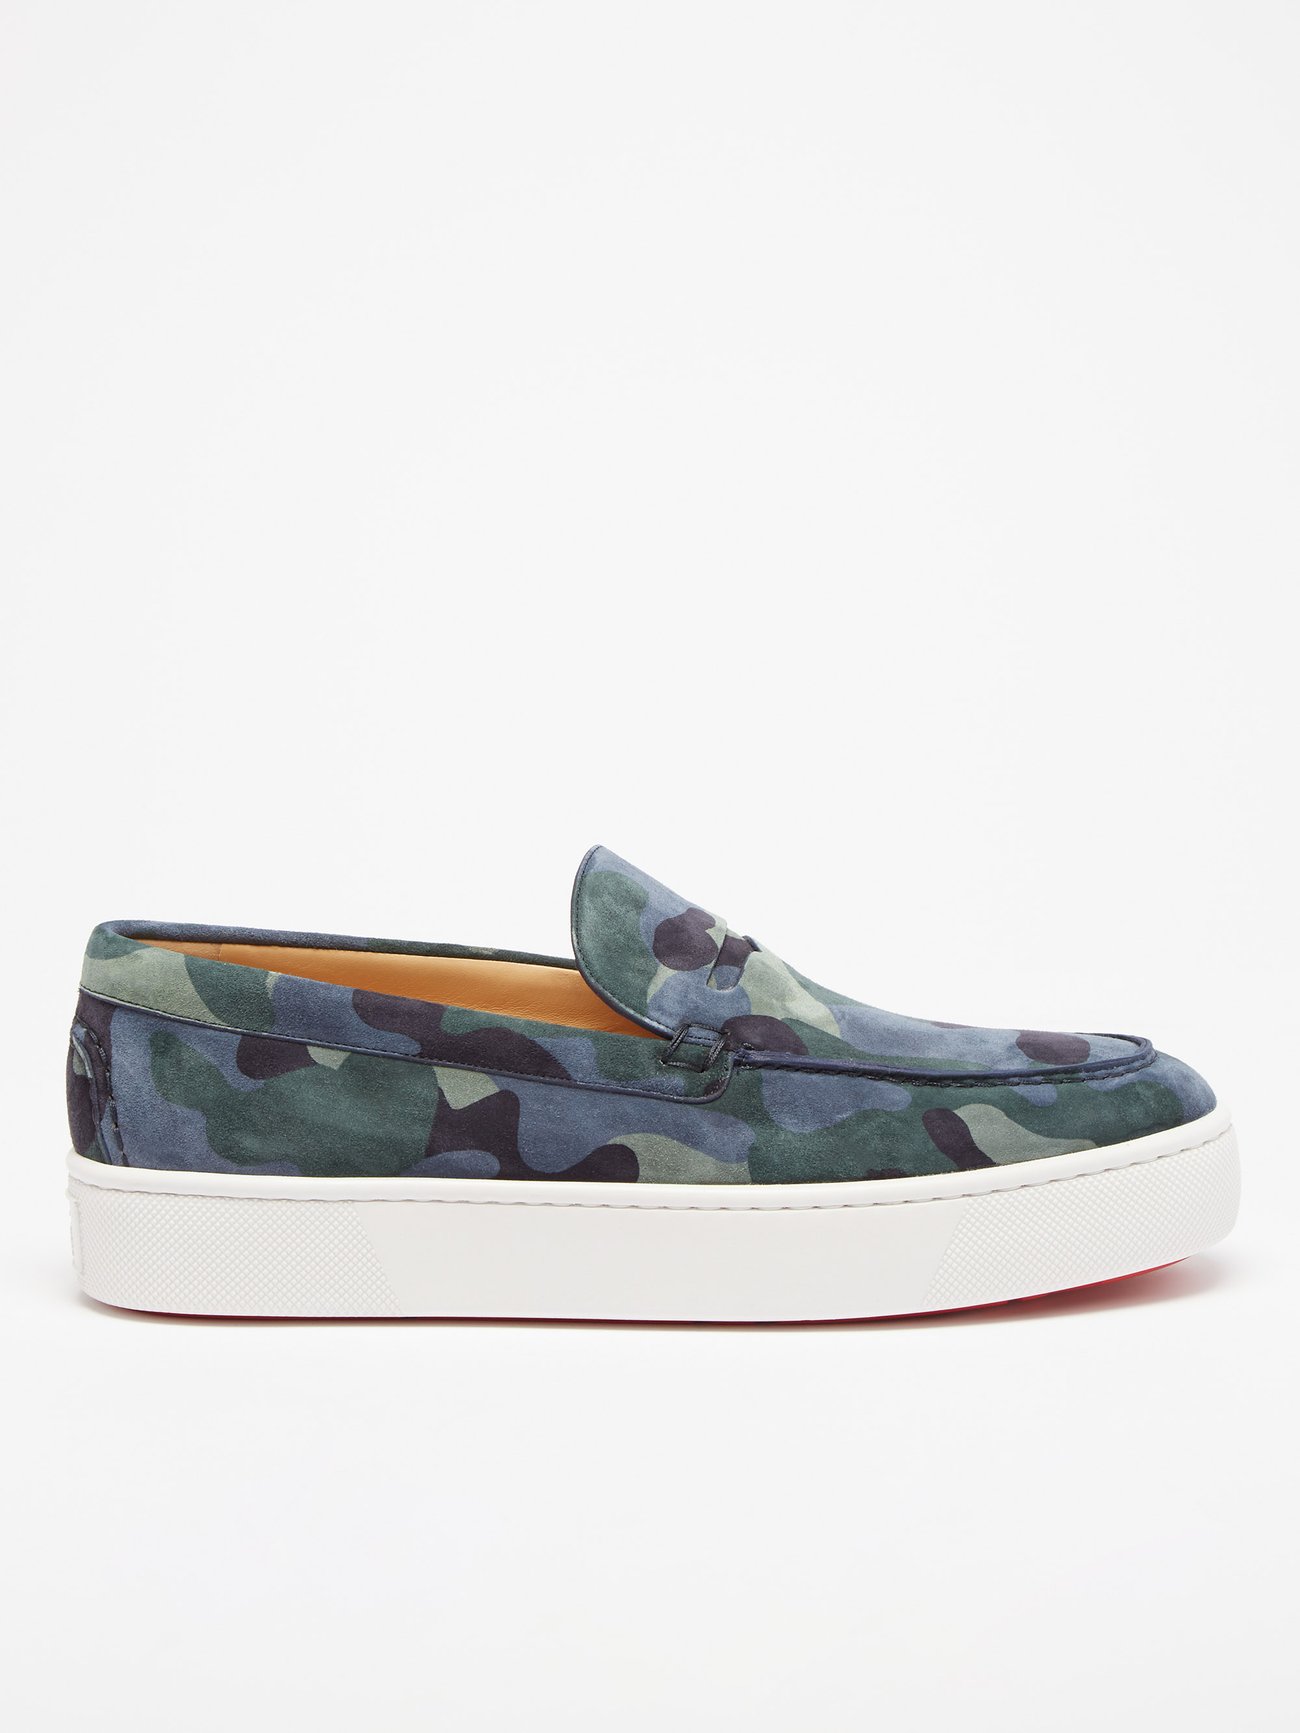 Blue Paqueboat slip-on camouflage-suede trainers | Christian Louboutin ...